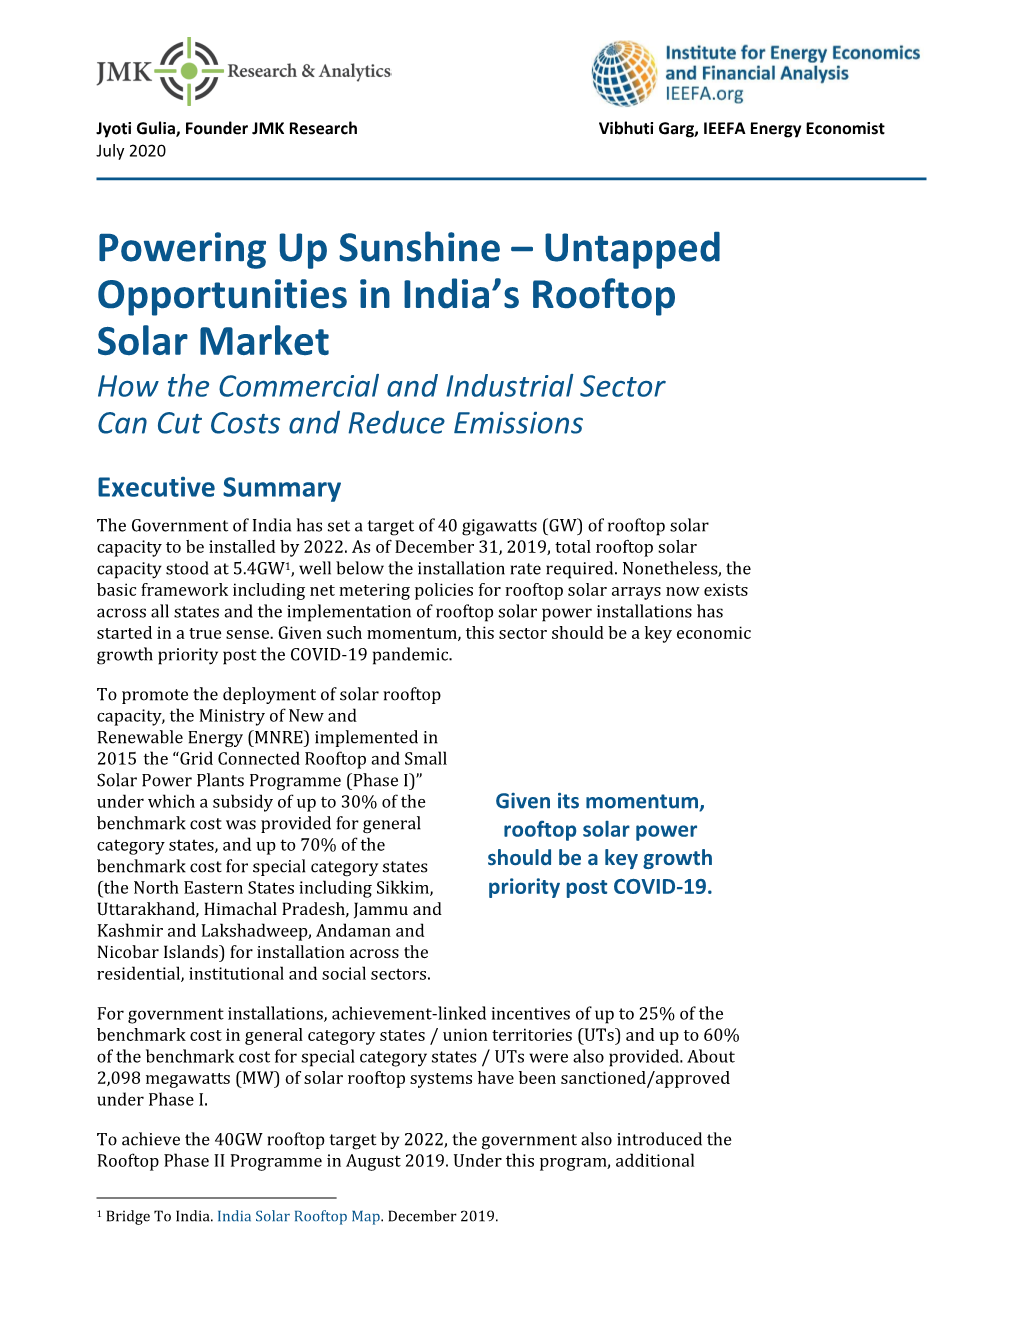 Untapped Opportunities in India's Rooftop Solar Market